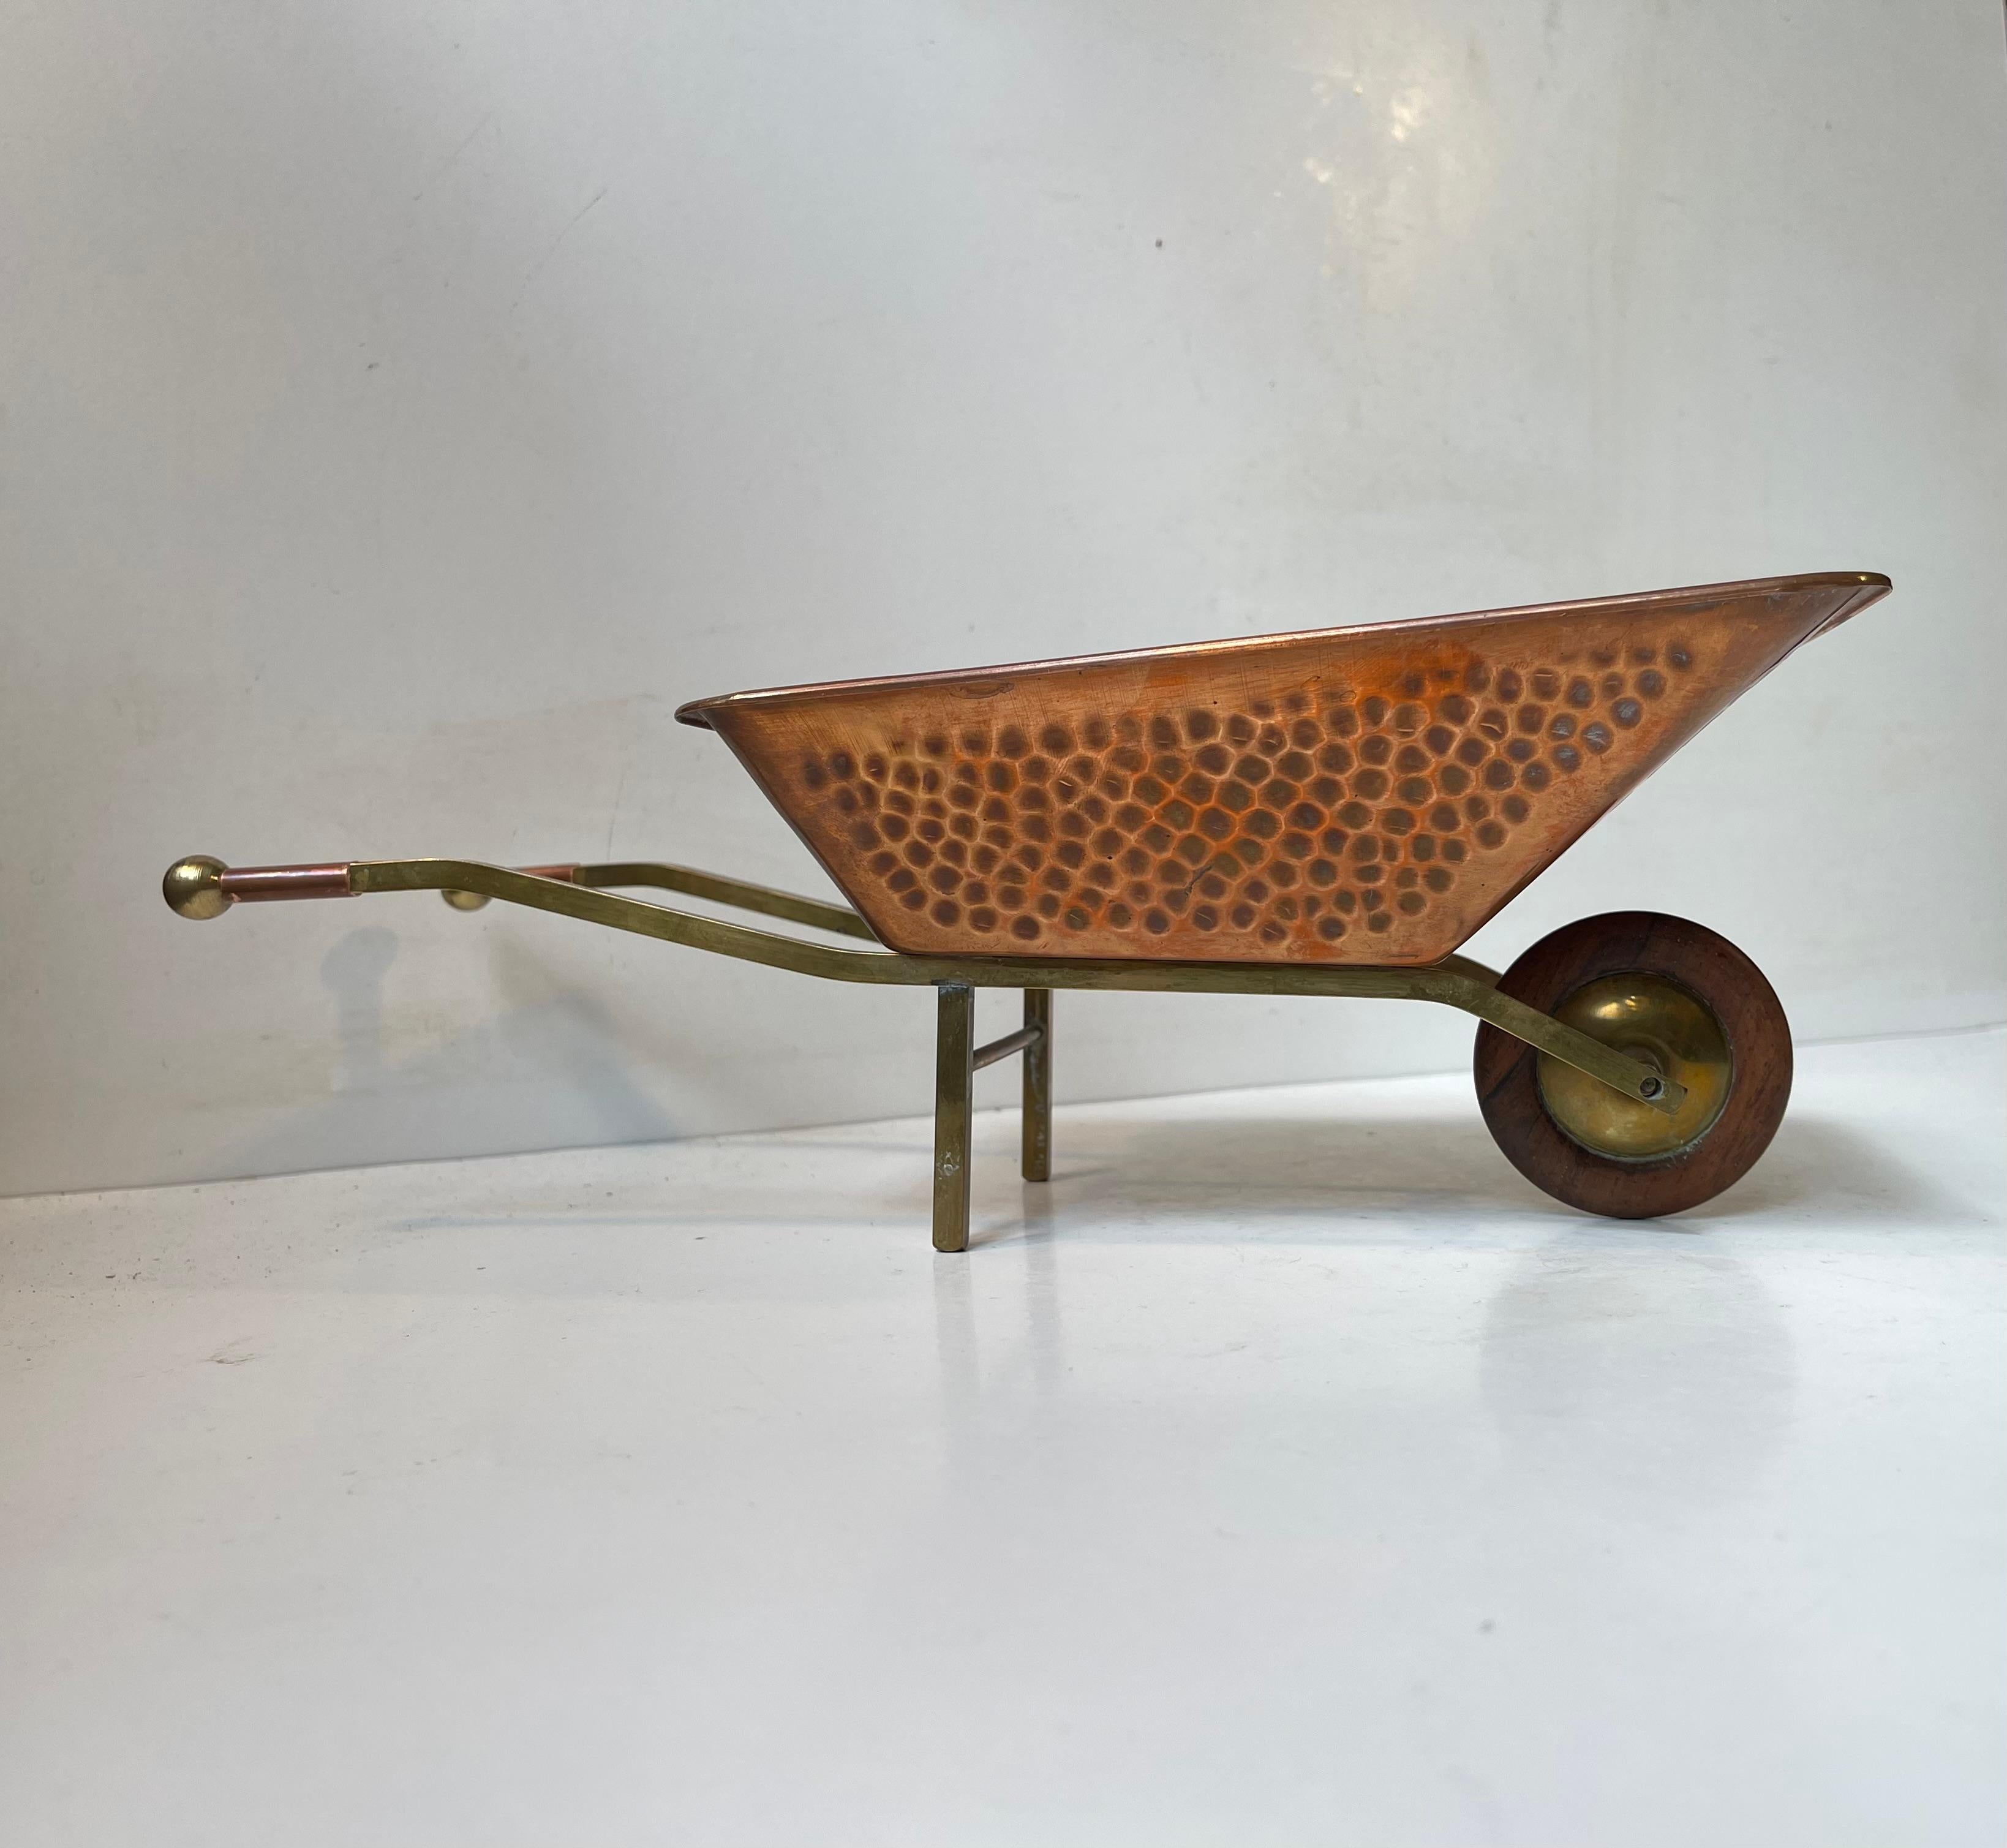 No stone is left unturned when it comes to the quality and craftsmanship of this midcentury miniature wheelbarrow planter (31x15.5x11.5 cm). It is executed in hammered copper, has a frame in brass and a turning wheel on Rosewood. Unknown